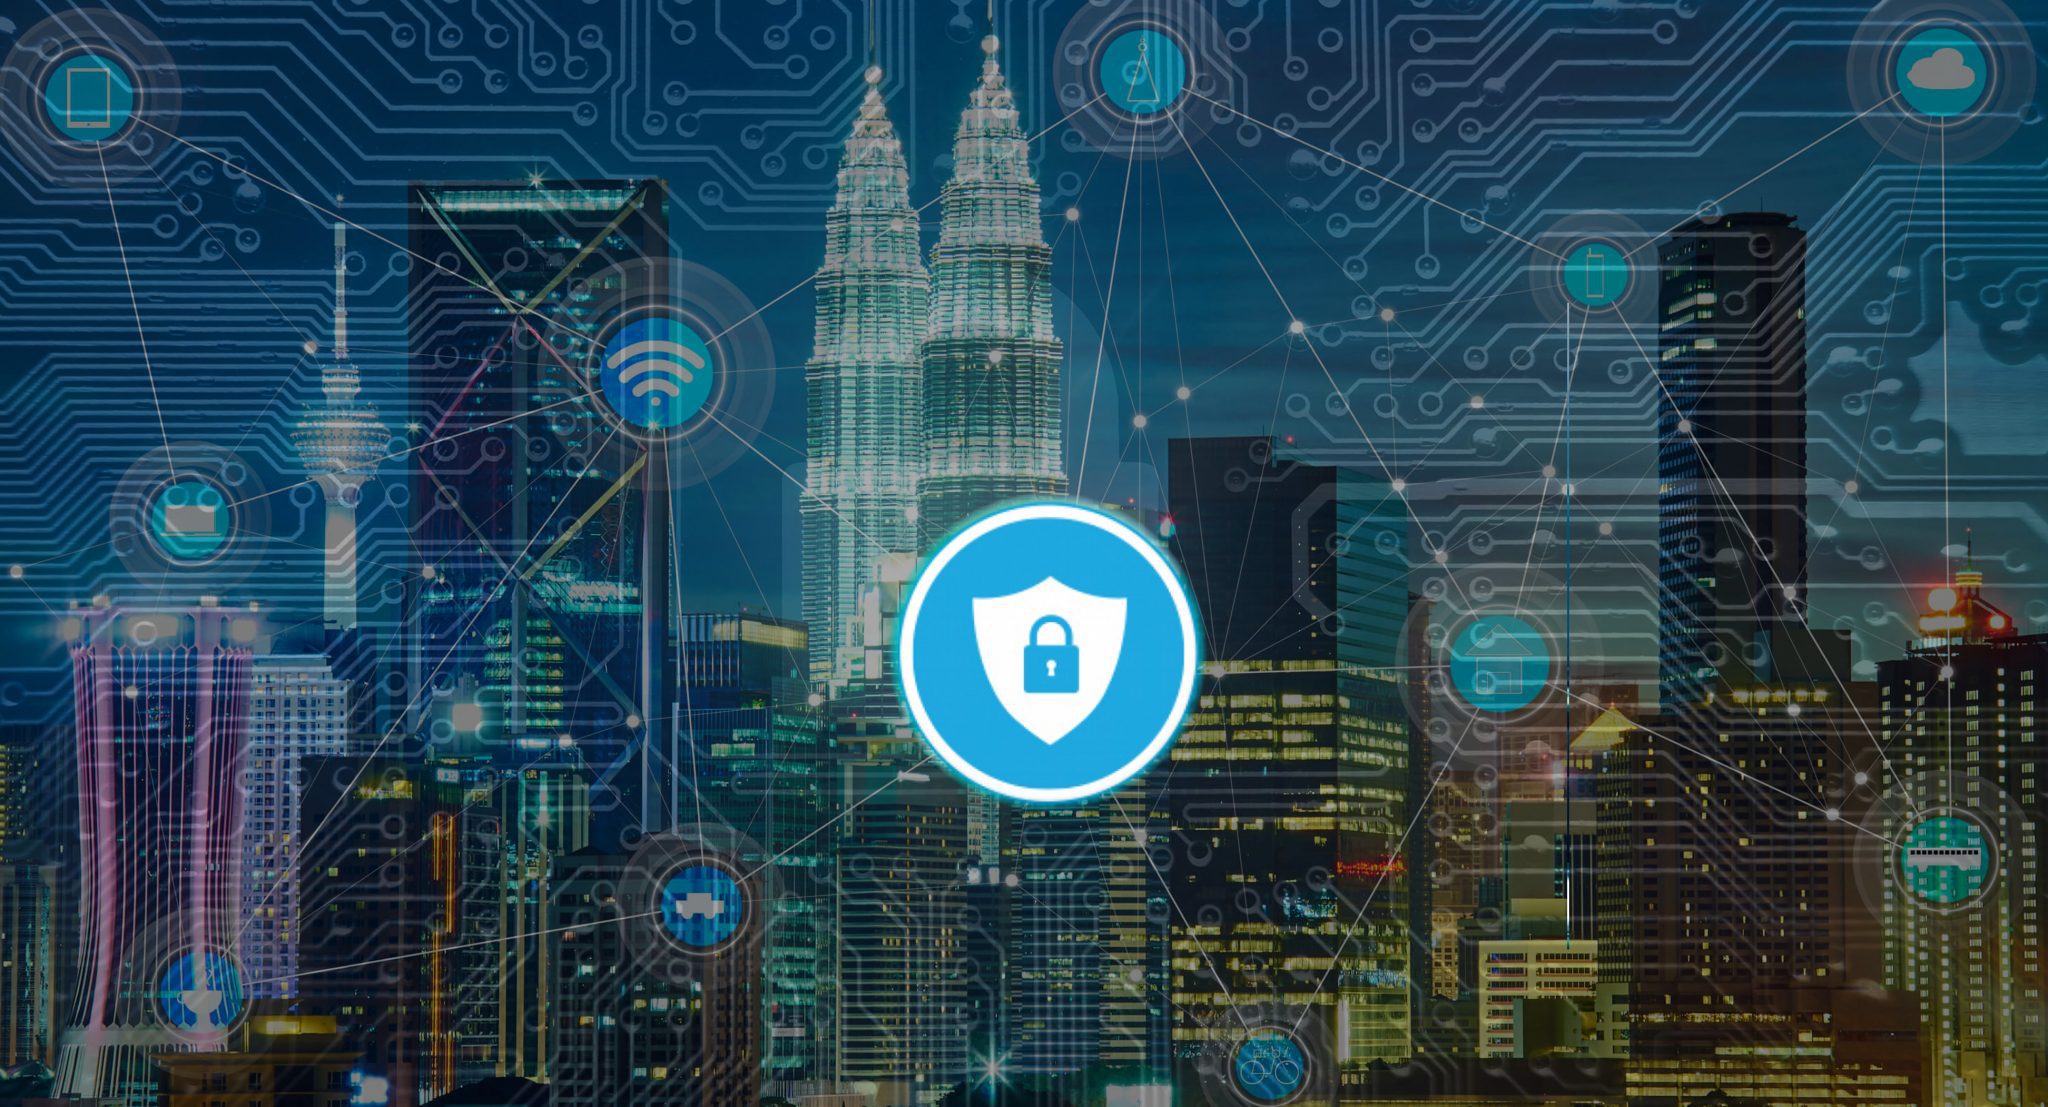 Securing the IoT Ecosystem: Device-Level Considerations